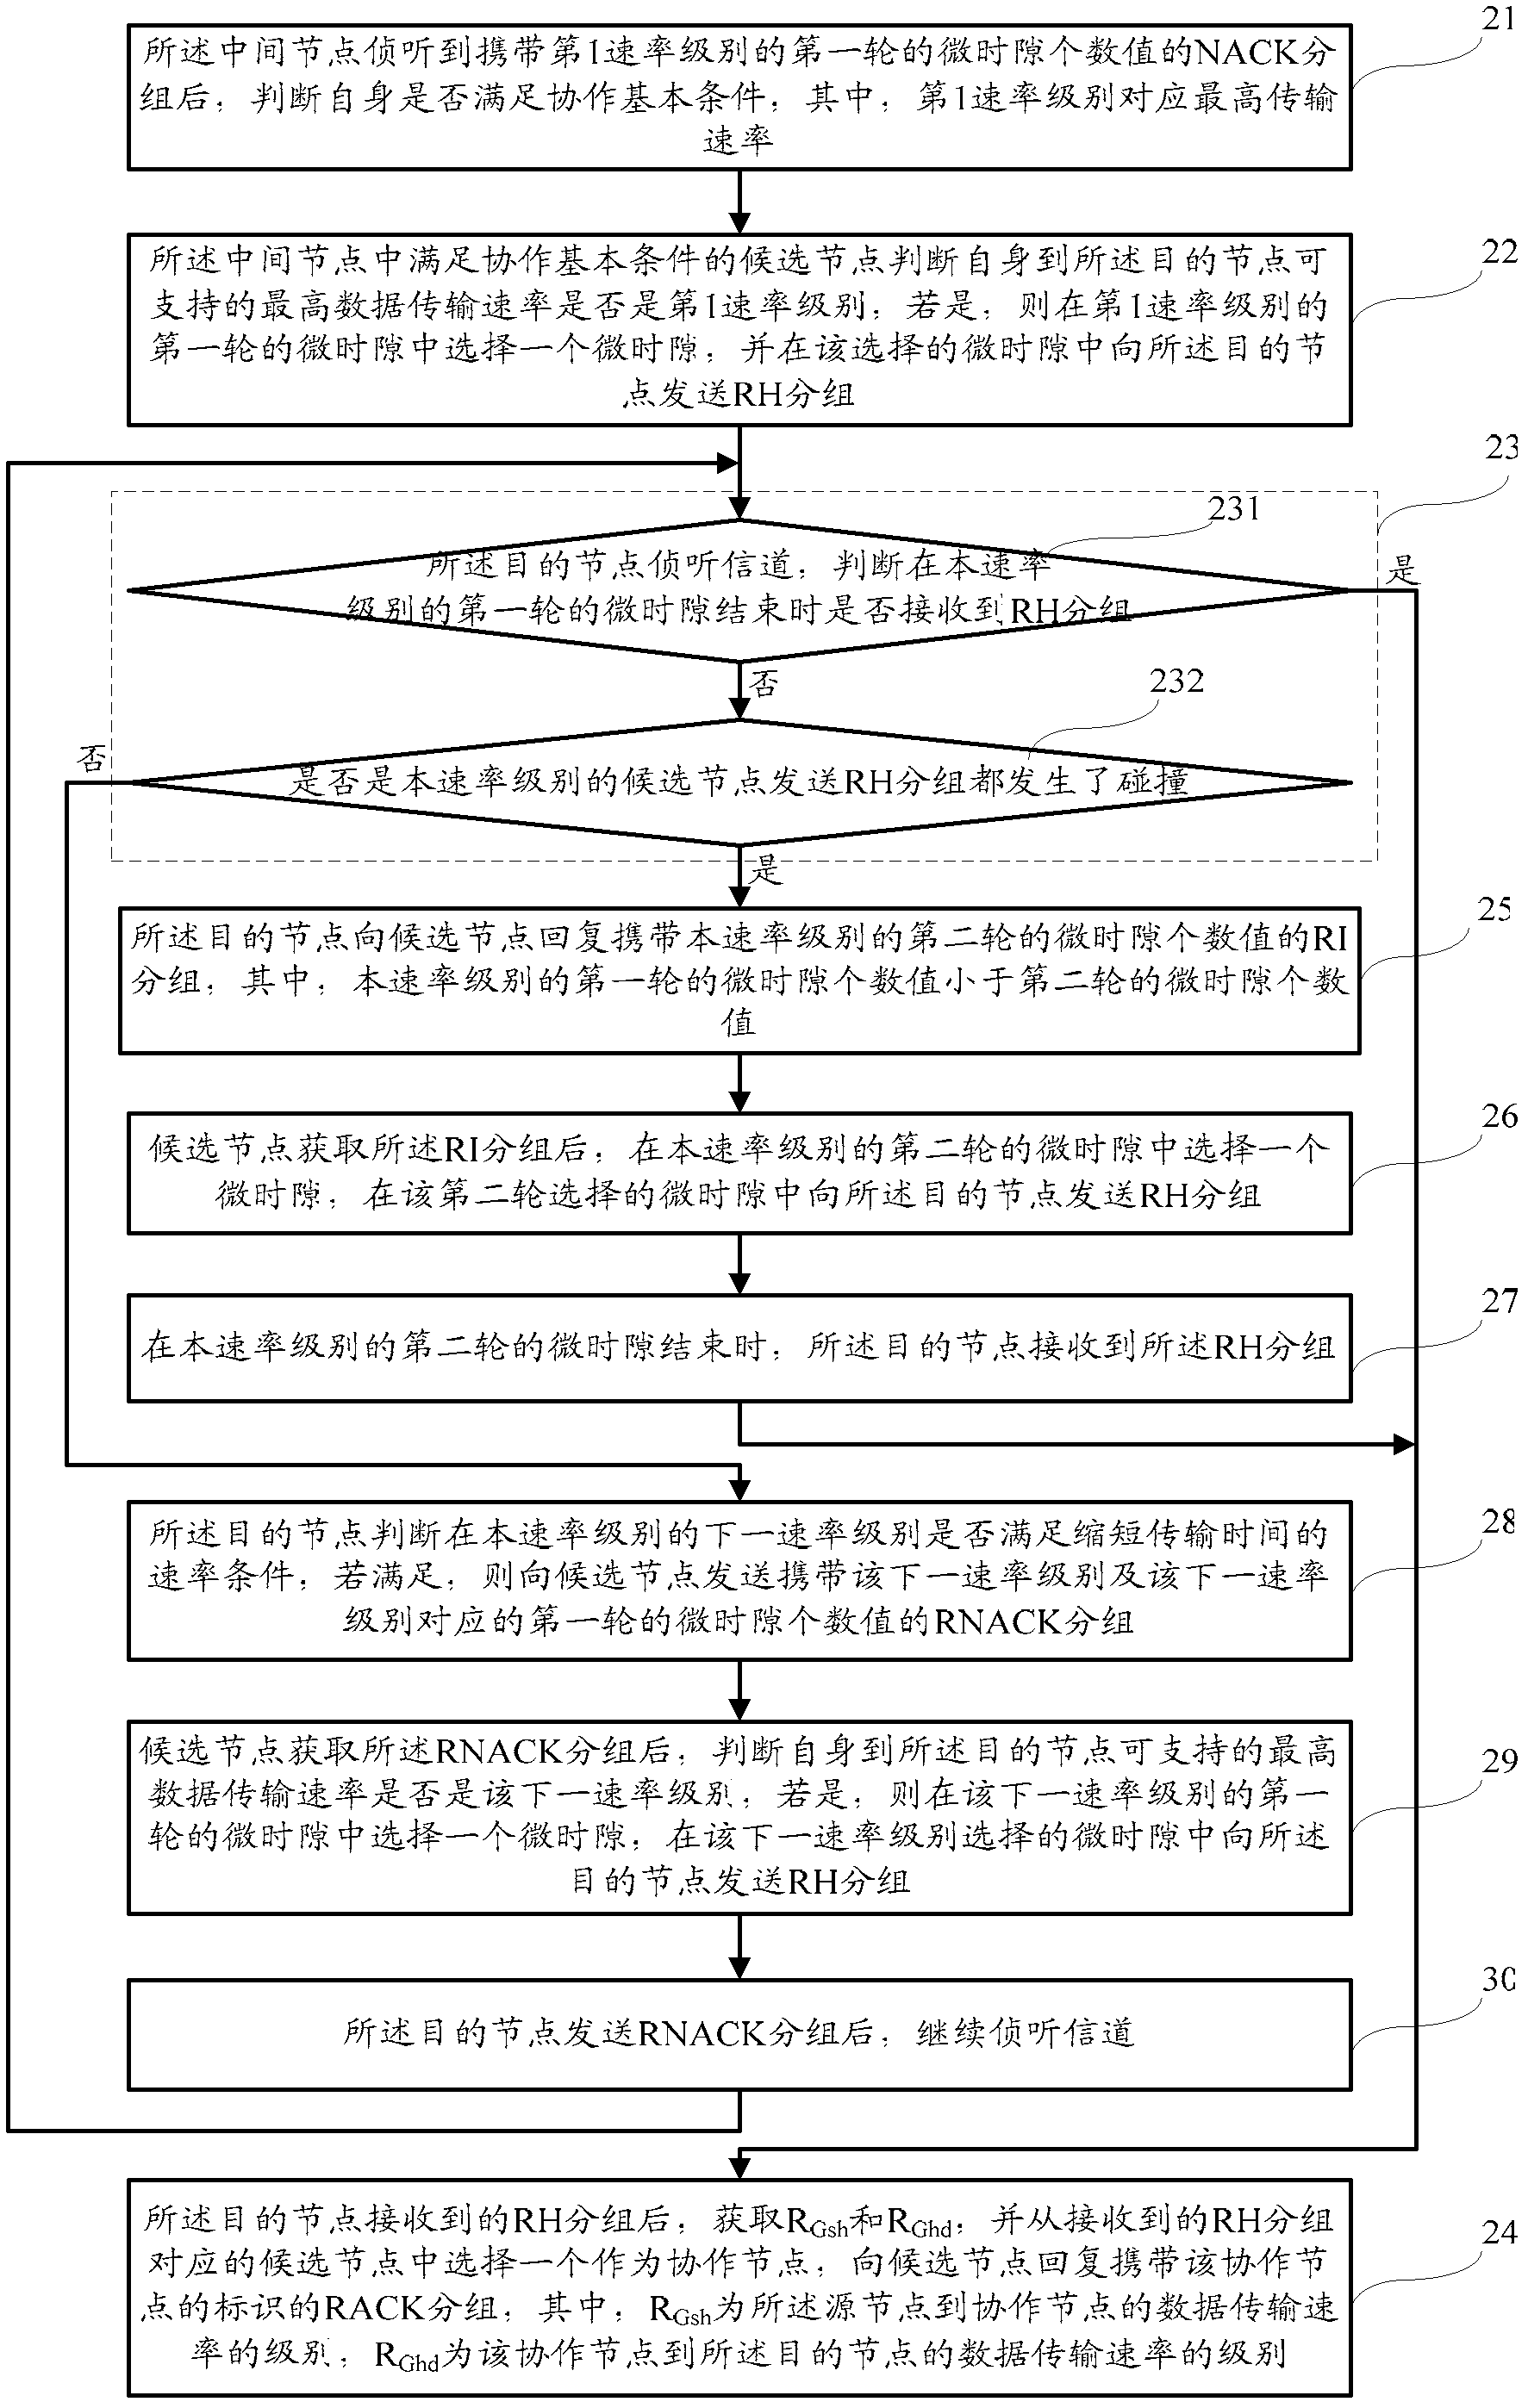 Multi-rate adaptive cooperative access method and system